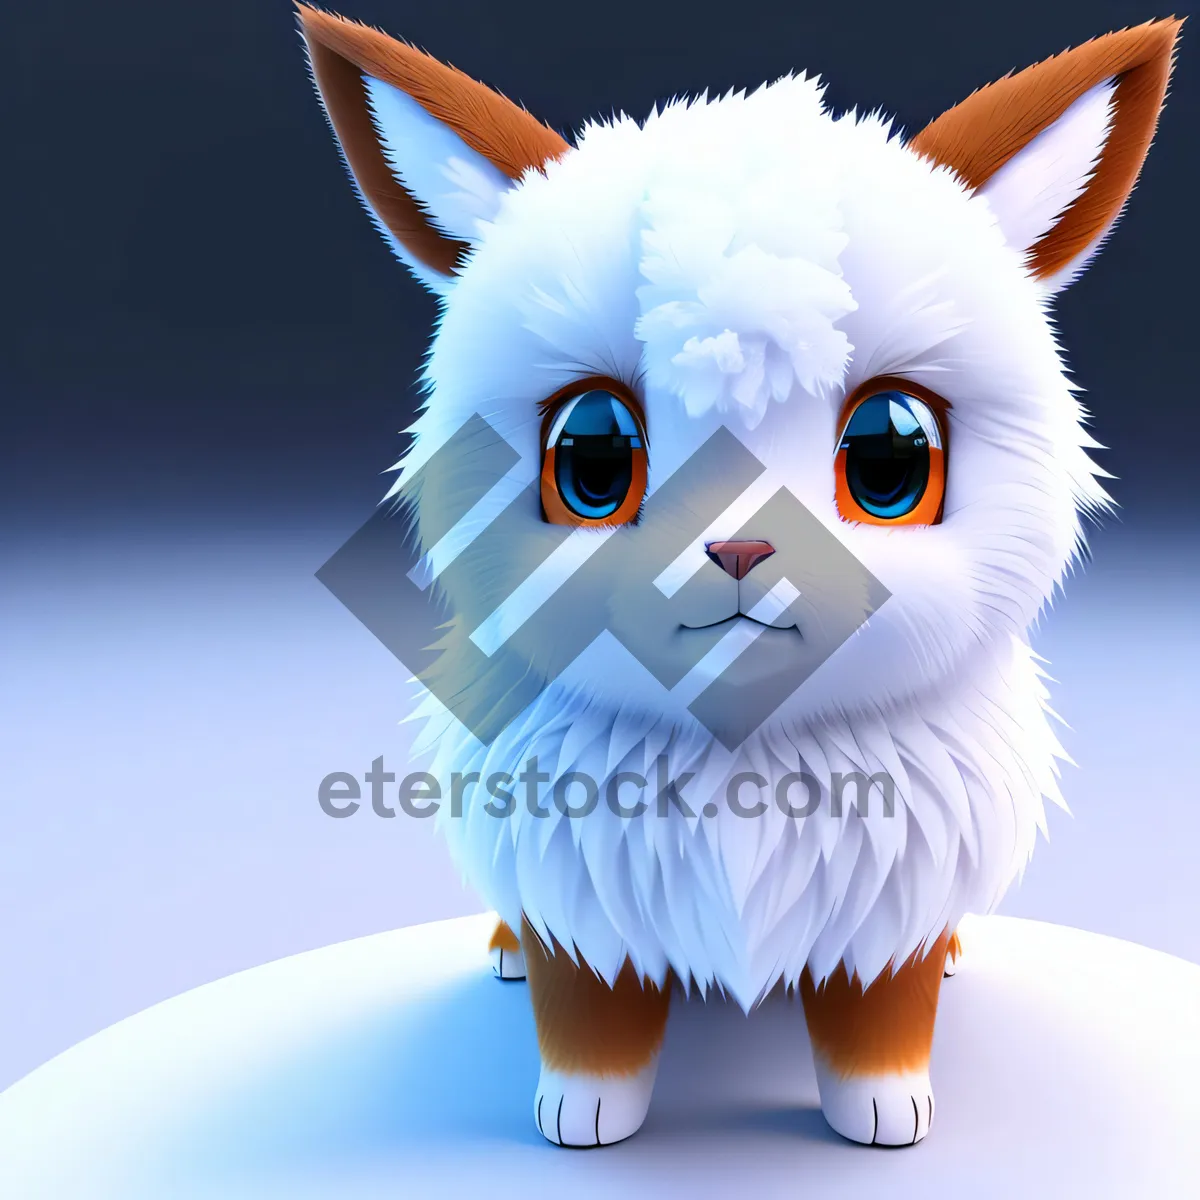 Picture of Cute Cartoon Baby Bunny with Playful Ears